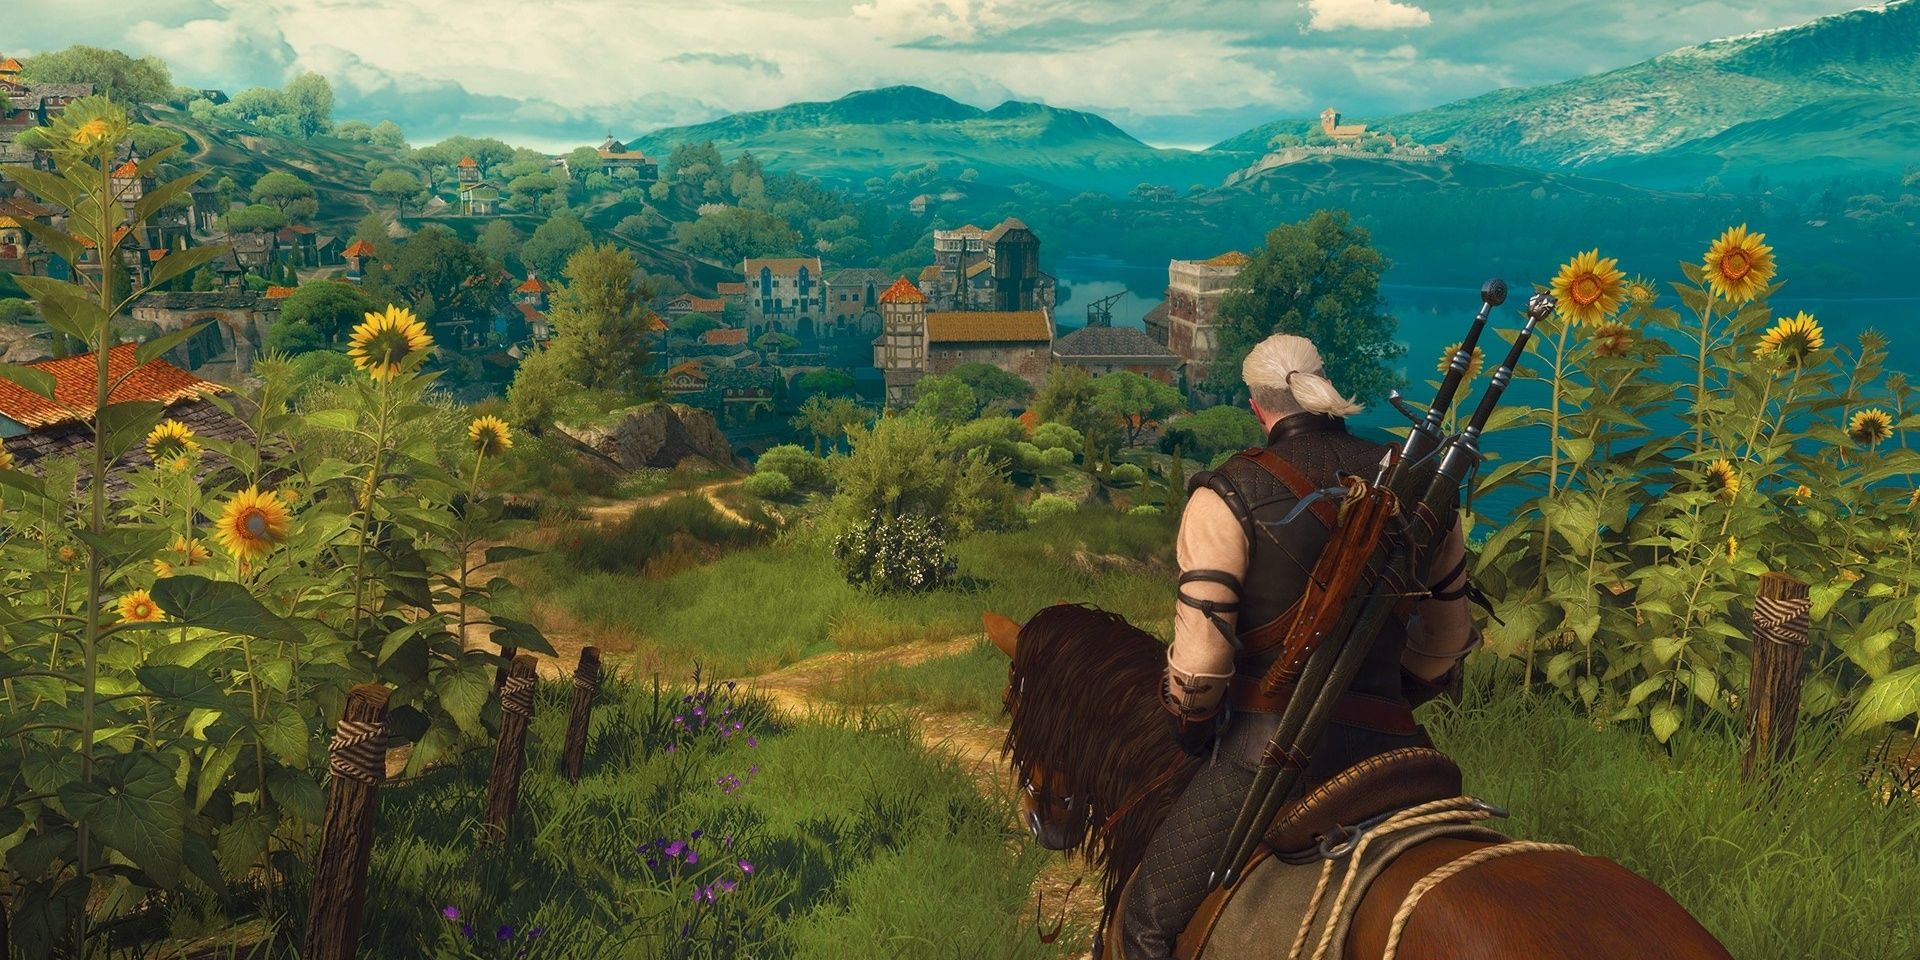 Geralt riding a horse in The Witcher game